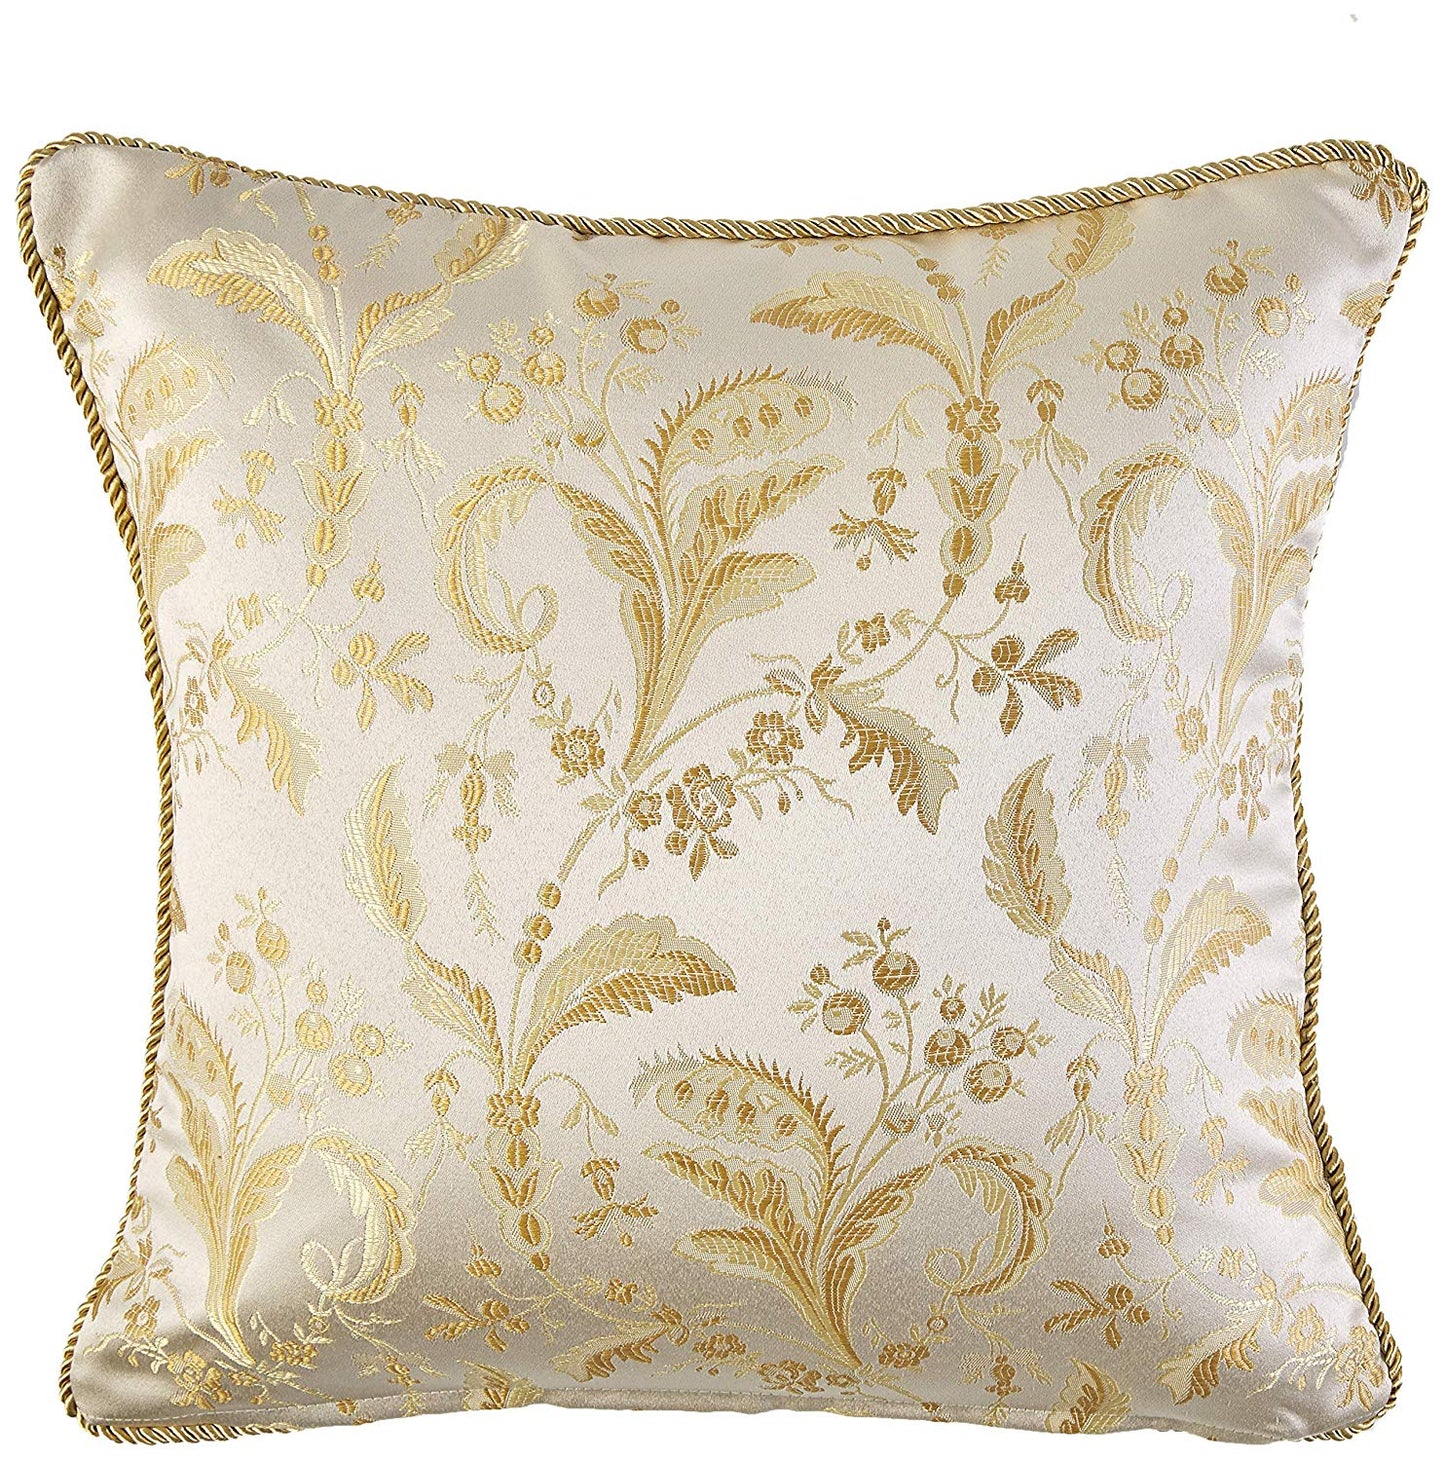 Luxury Damask Decorative Throw Pillow Covers